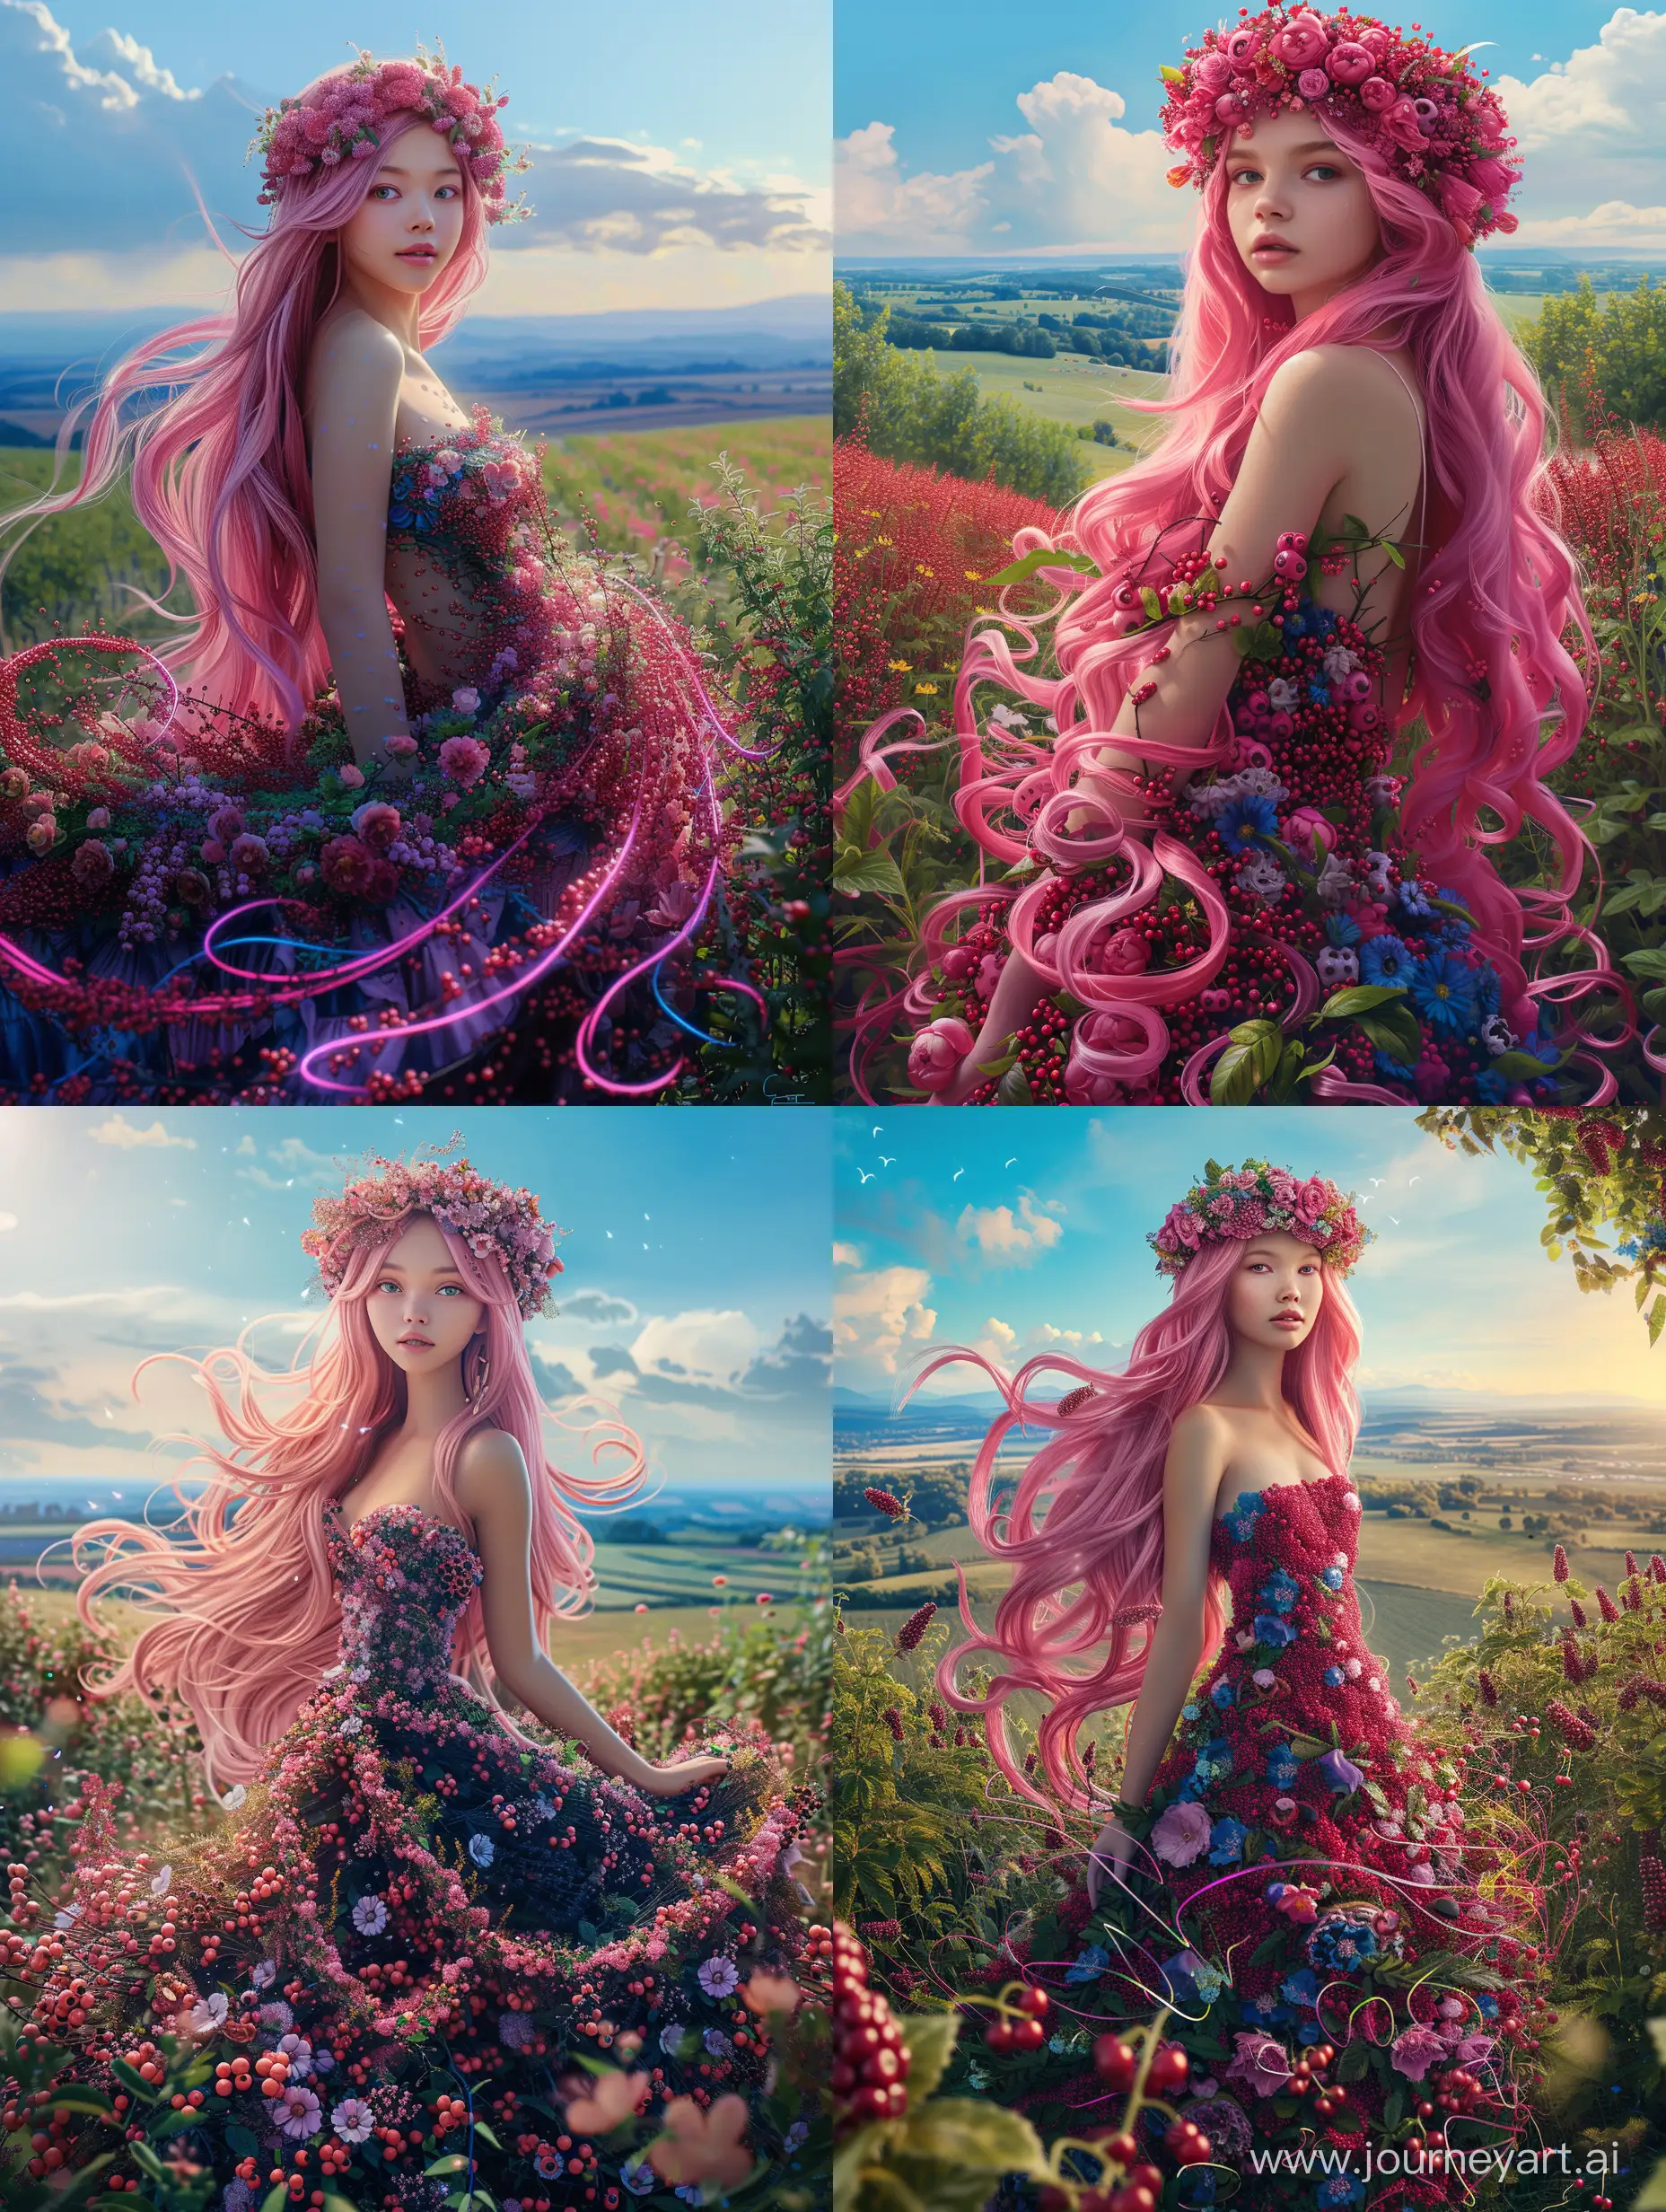 Enchanting-Summer-Queen-with-Pink-Hair-in-a-Garden-of-Berries-and-Flowers